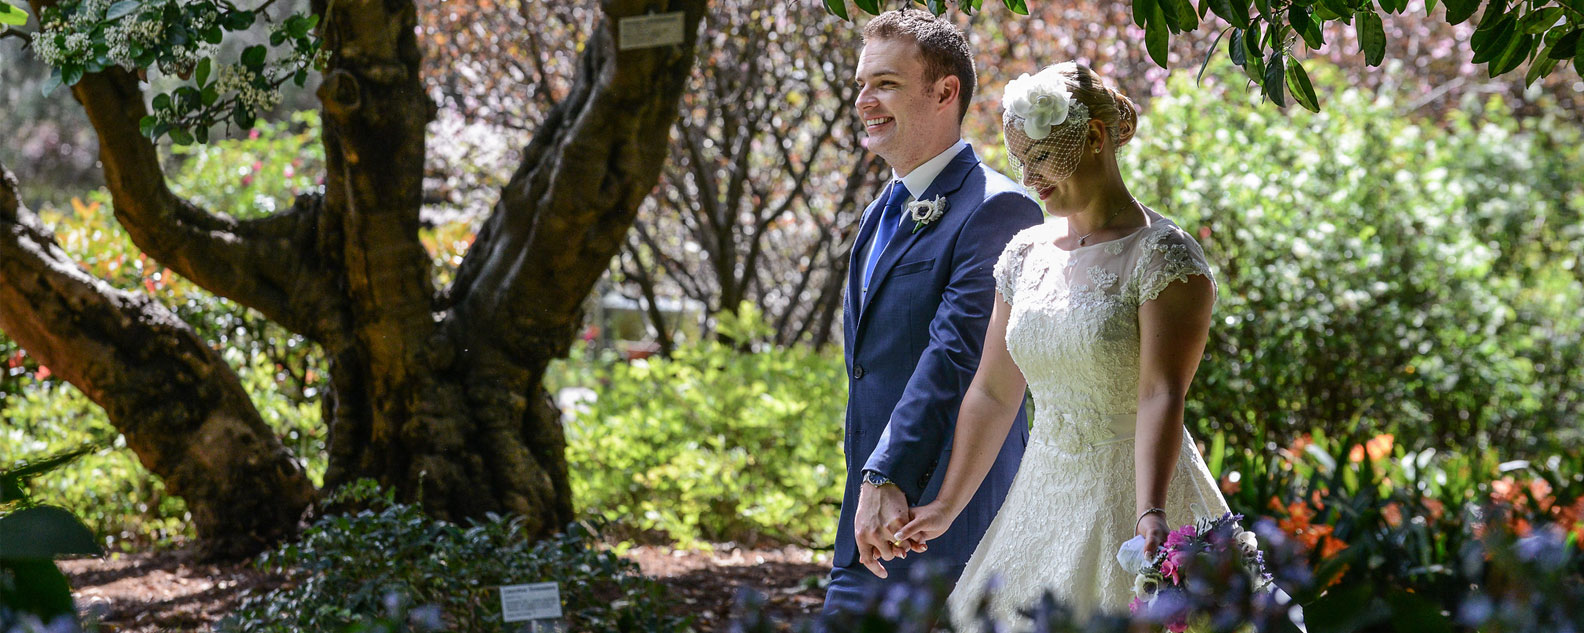 A bride and groom walking in the rose garden at the Royal Botnaic Garden Sydney, there is a forked tree trunk to the left and shrubbery in the background